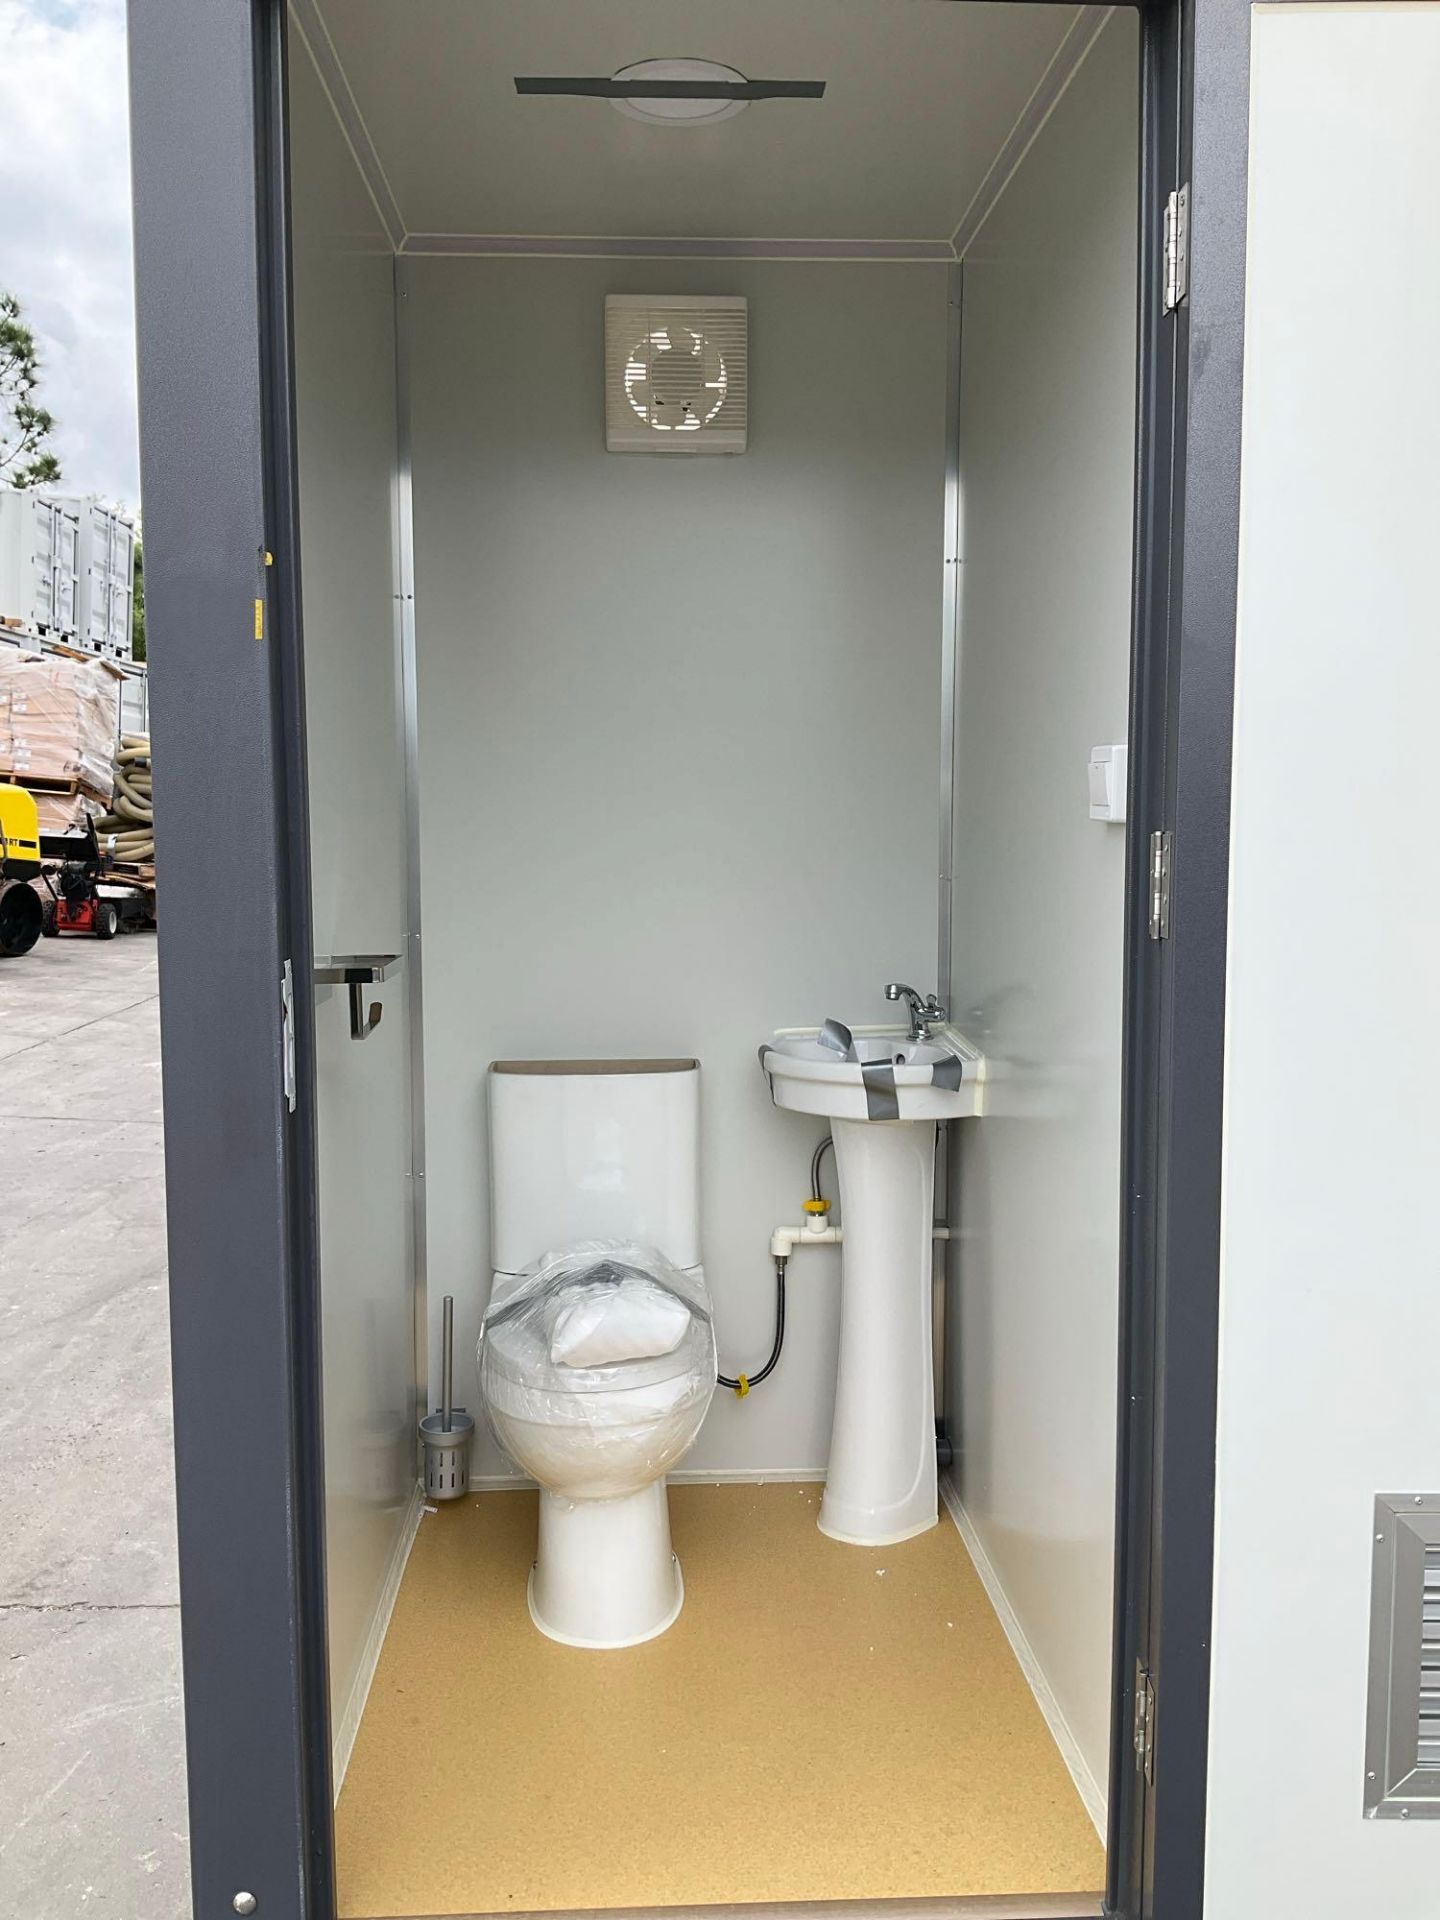 UNUSED PORTABLE DOUBLE BATHROOM UNIT, 2 STALLS, ELECTRIC & PLUMBING HOOK UP WITH EXTERIOR PLUMBING - Image 11 of 14